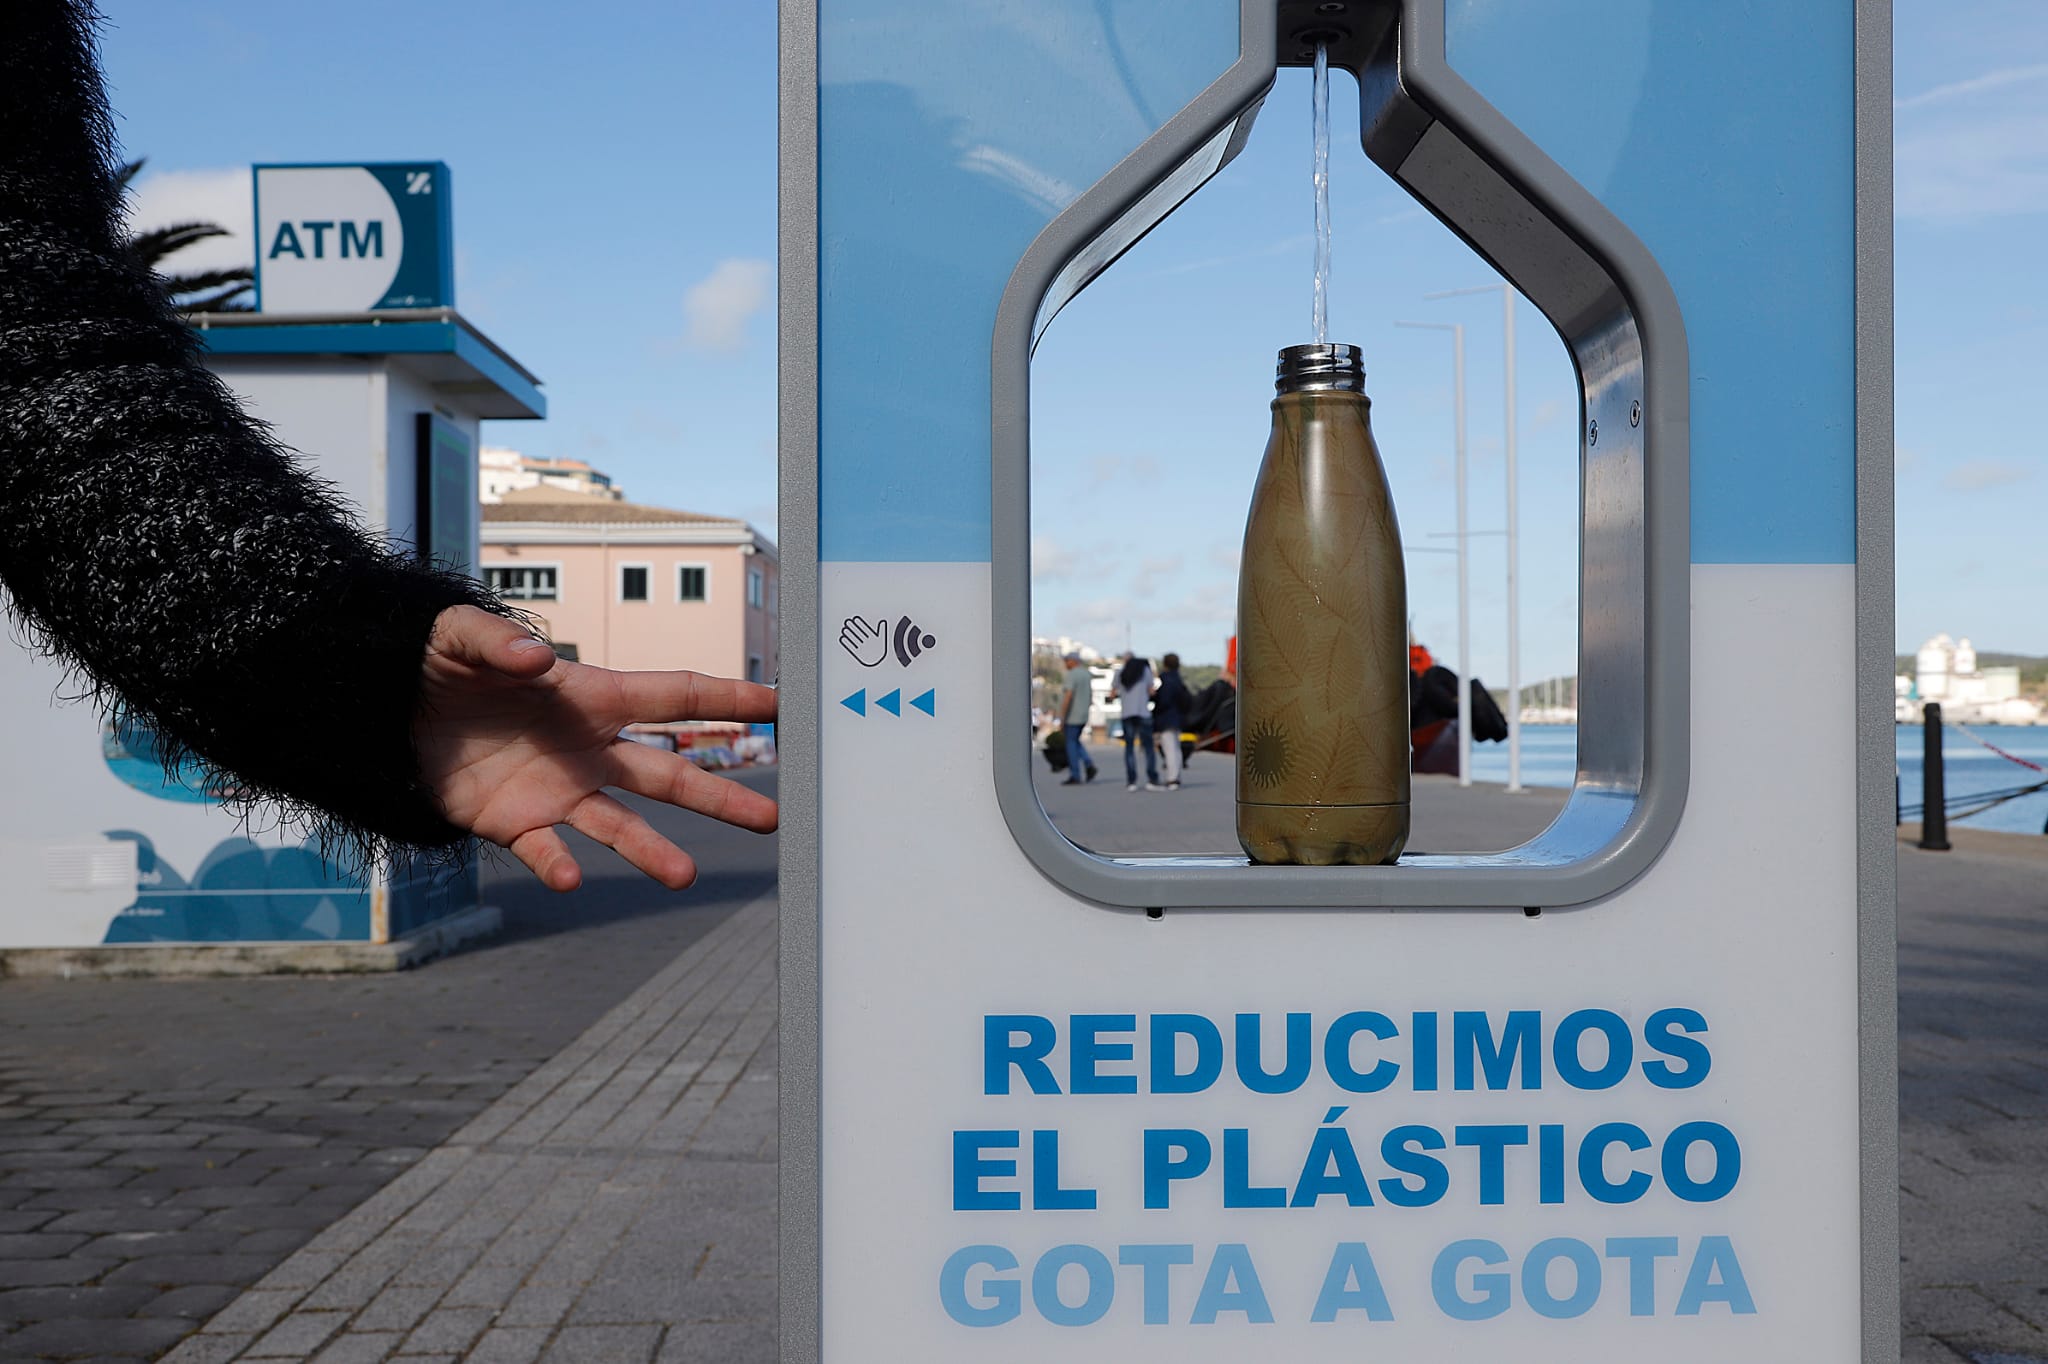 The Plastic-Free Menorca Alliance finances the installation of a filtered water fountain in the port of Maó to reduce the use of plastic bottles